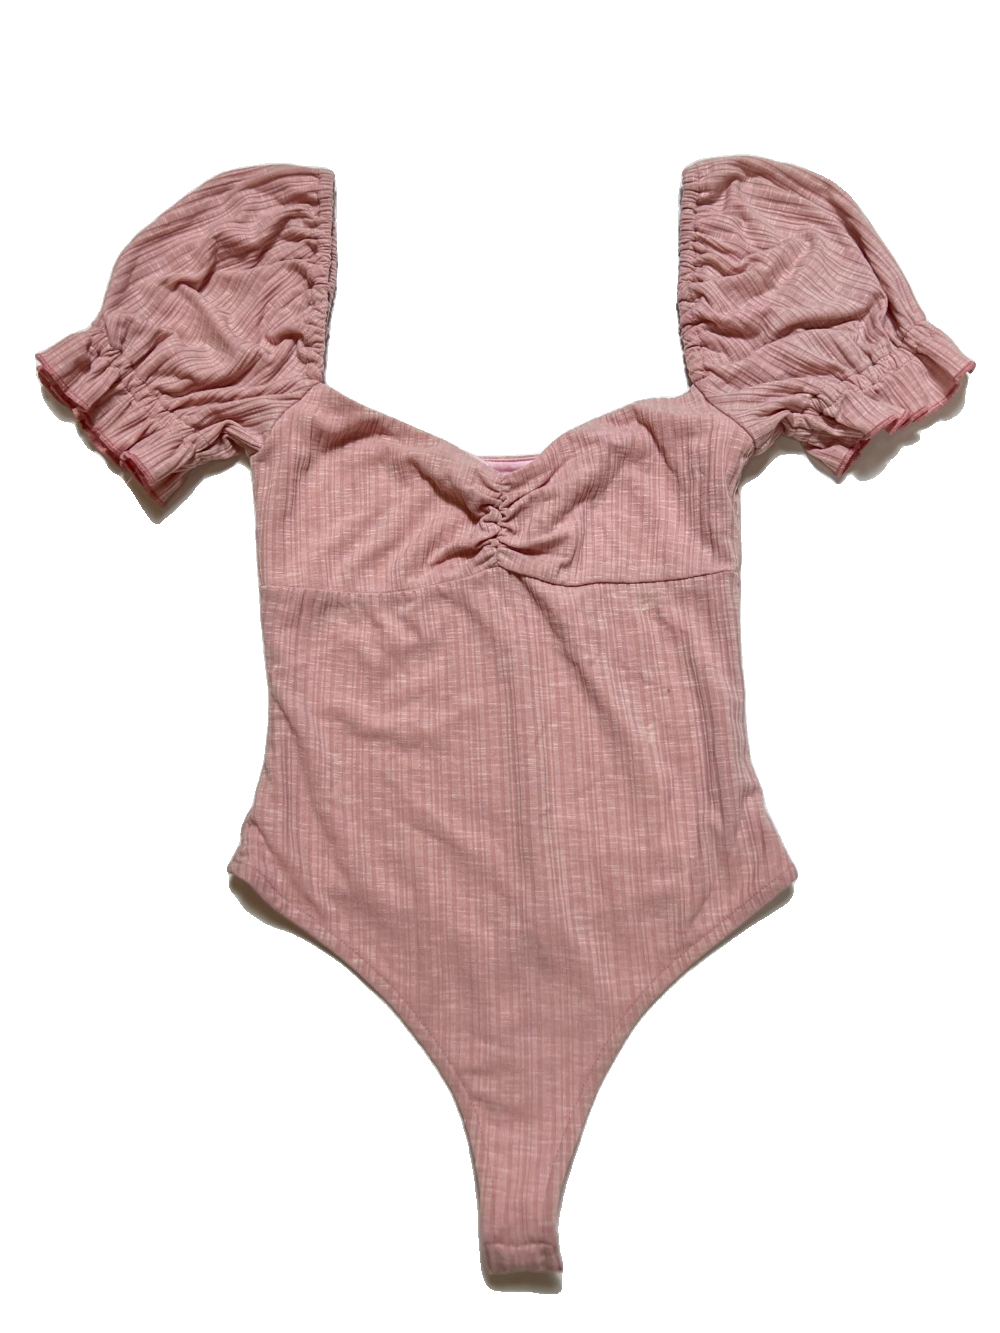 Privacy Please - Pink Bodysuit